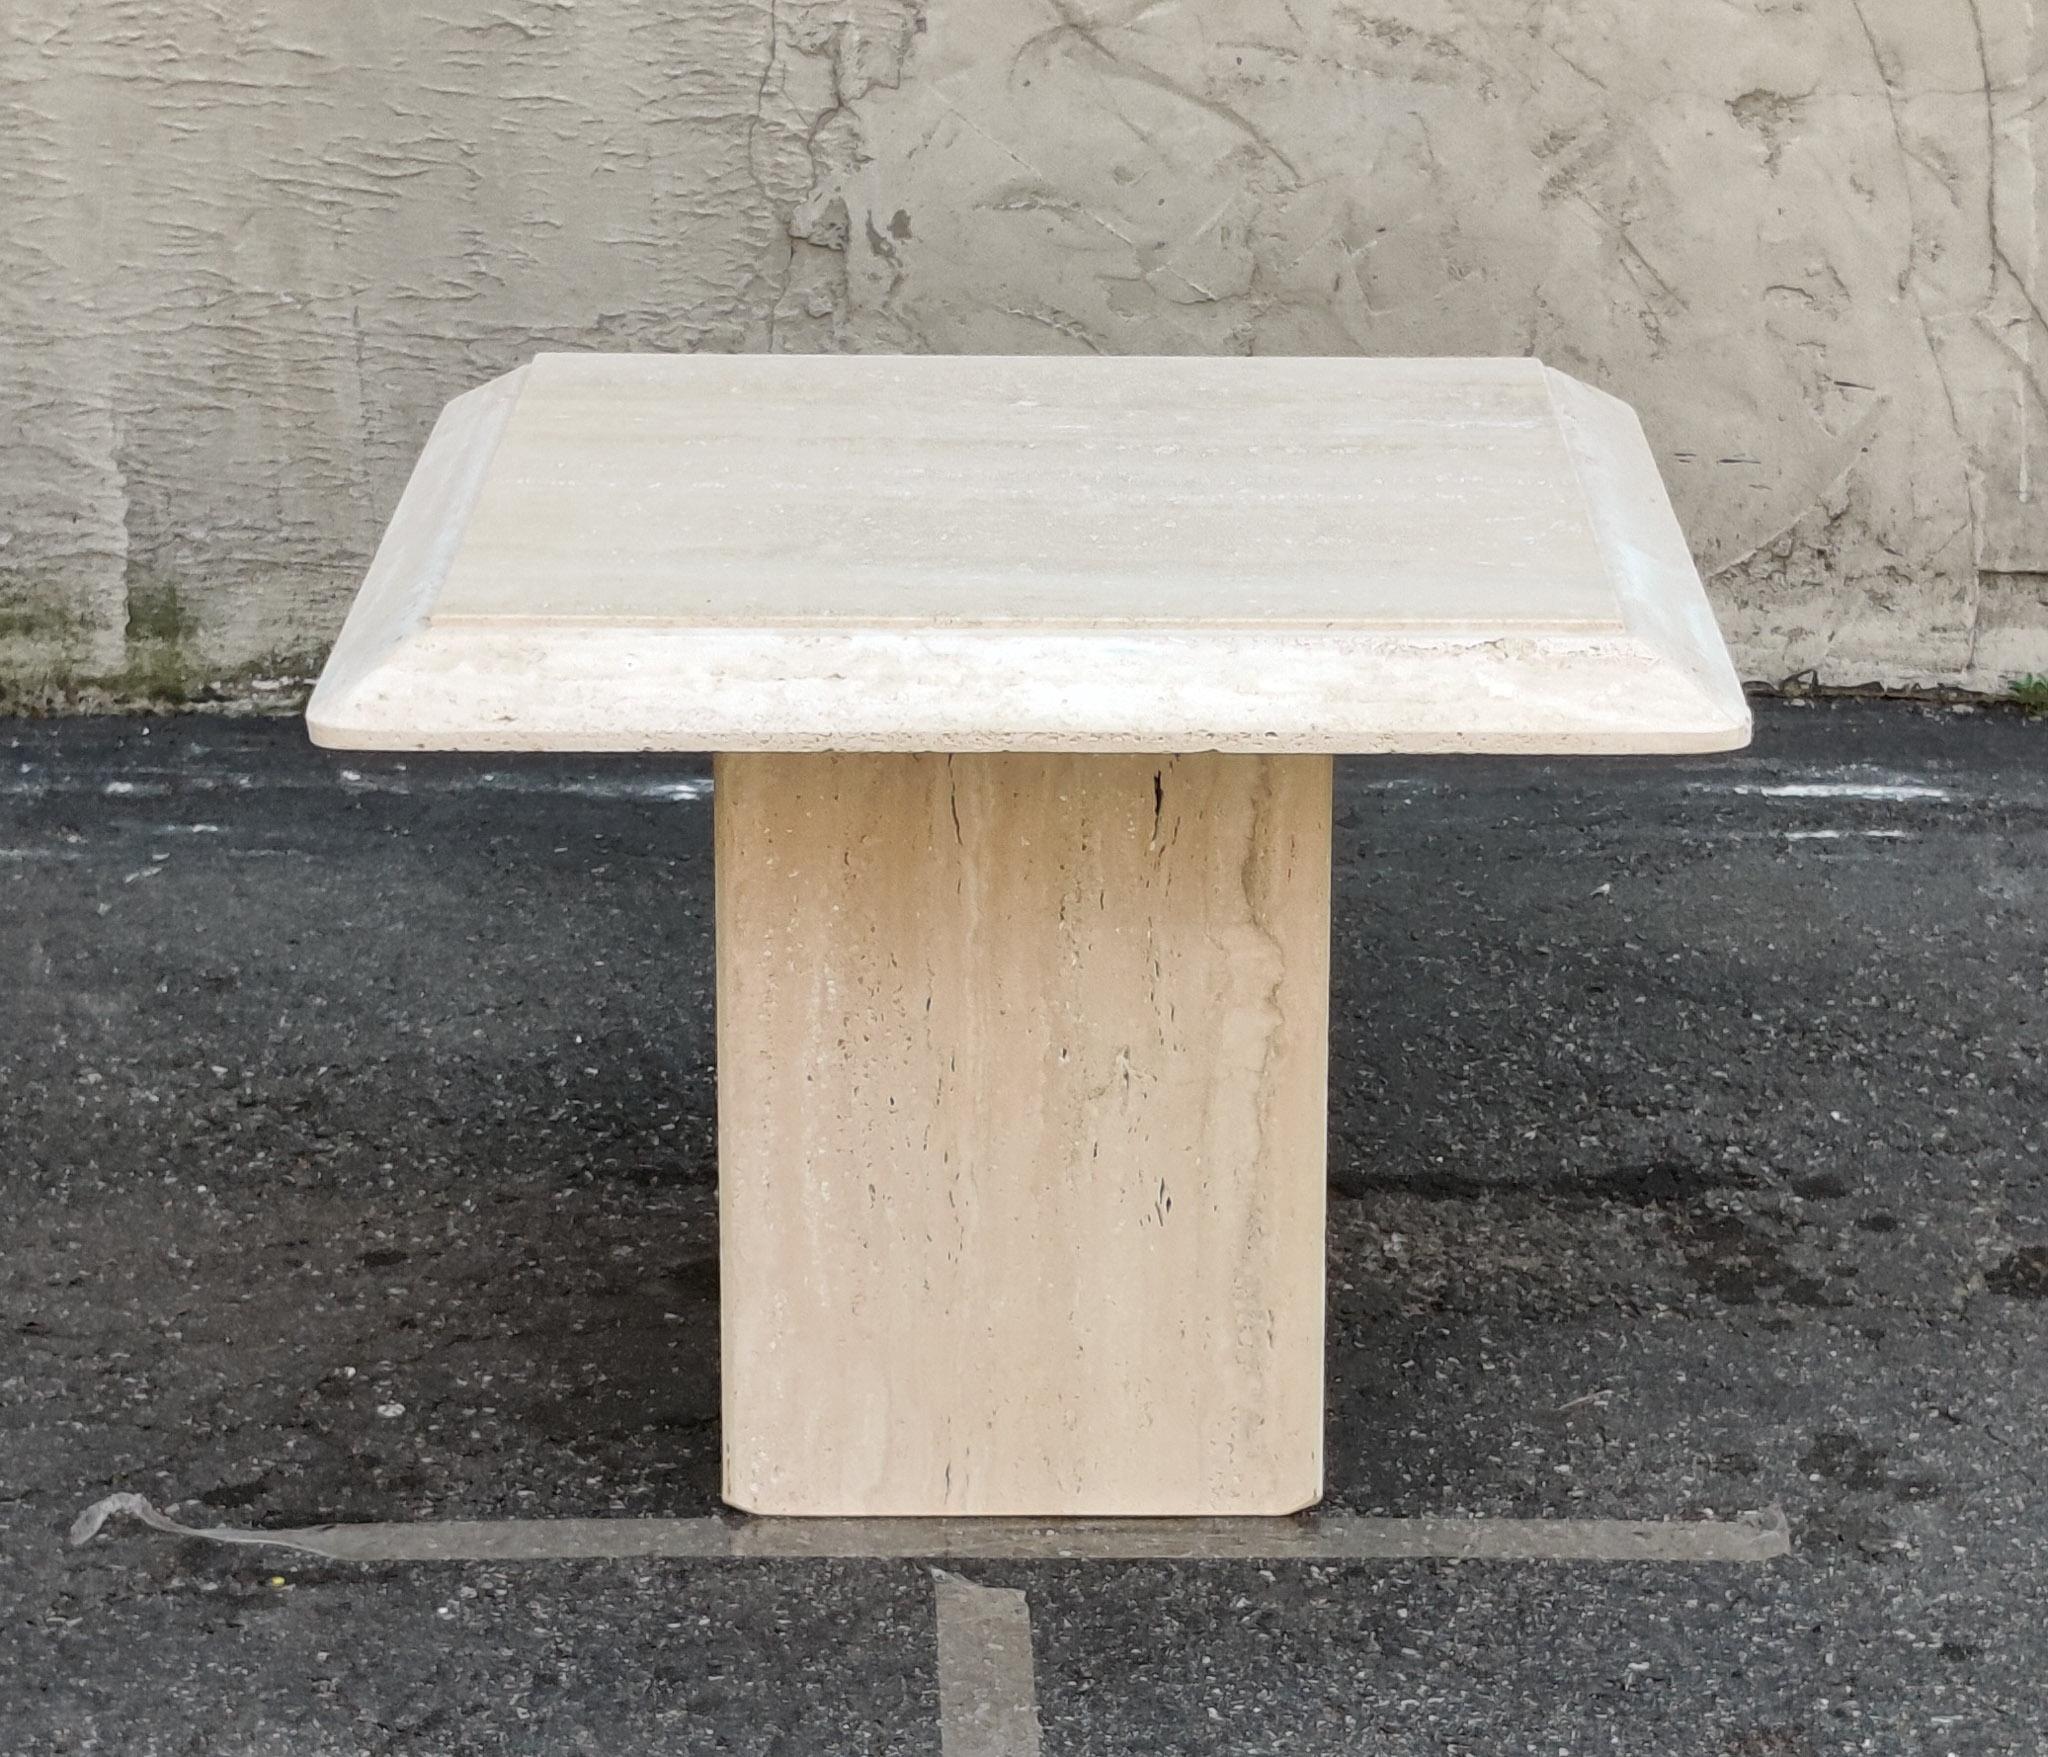 An amazing pair of Italian side tables with natural and porous travertine edging. The simplicity of the design and surface treatments is what makes this pair a classic example of strong and stoic Italian minimalist design, using top materials and